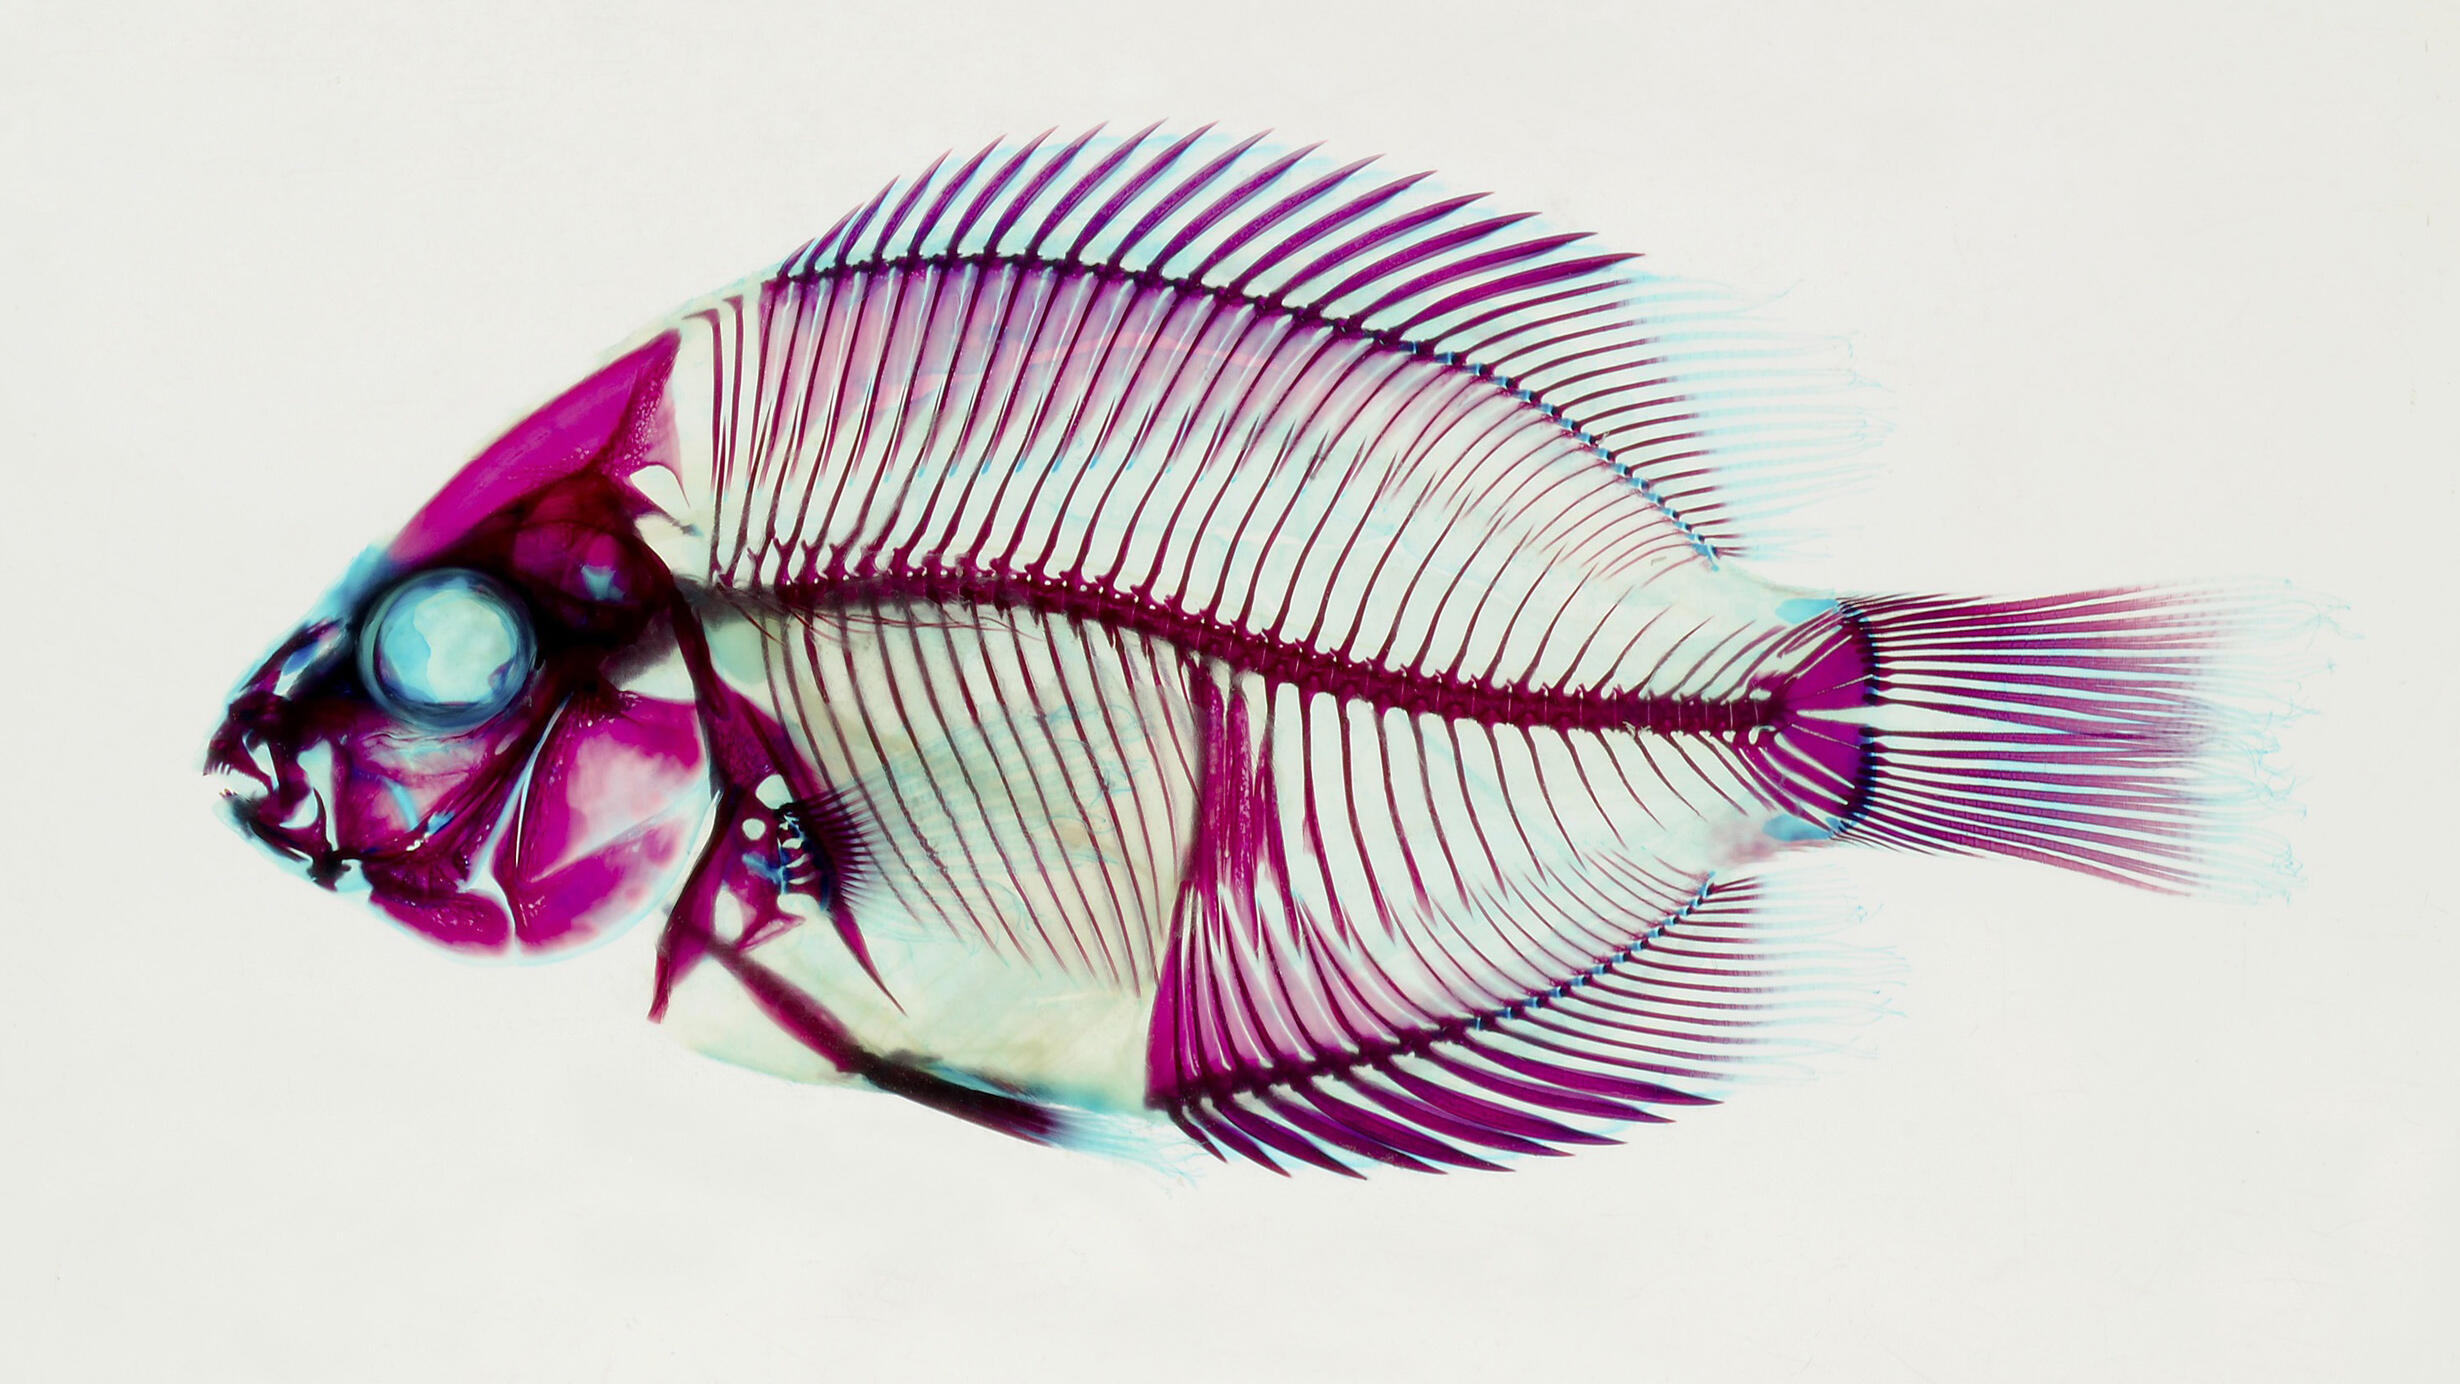 Xray of a fish shown in pink